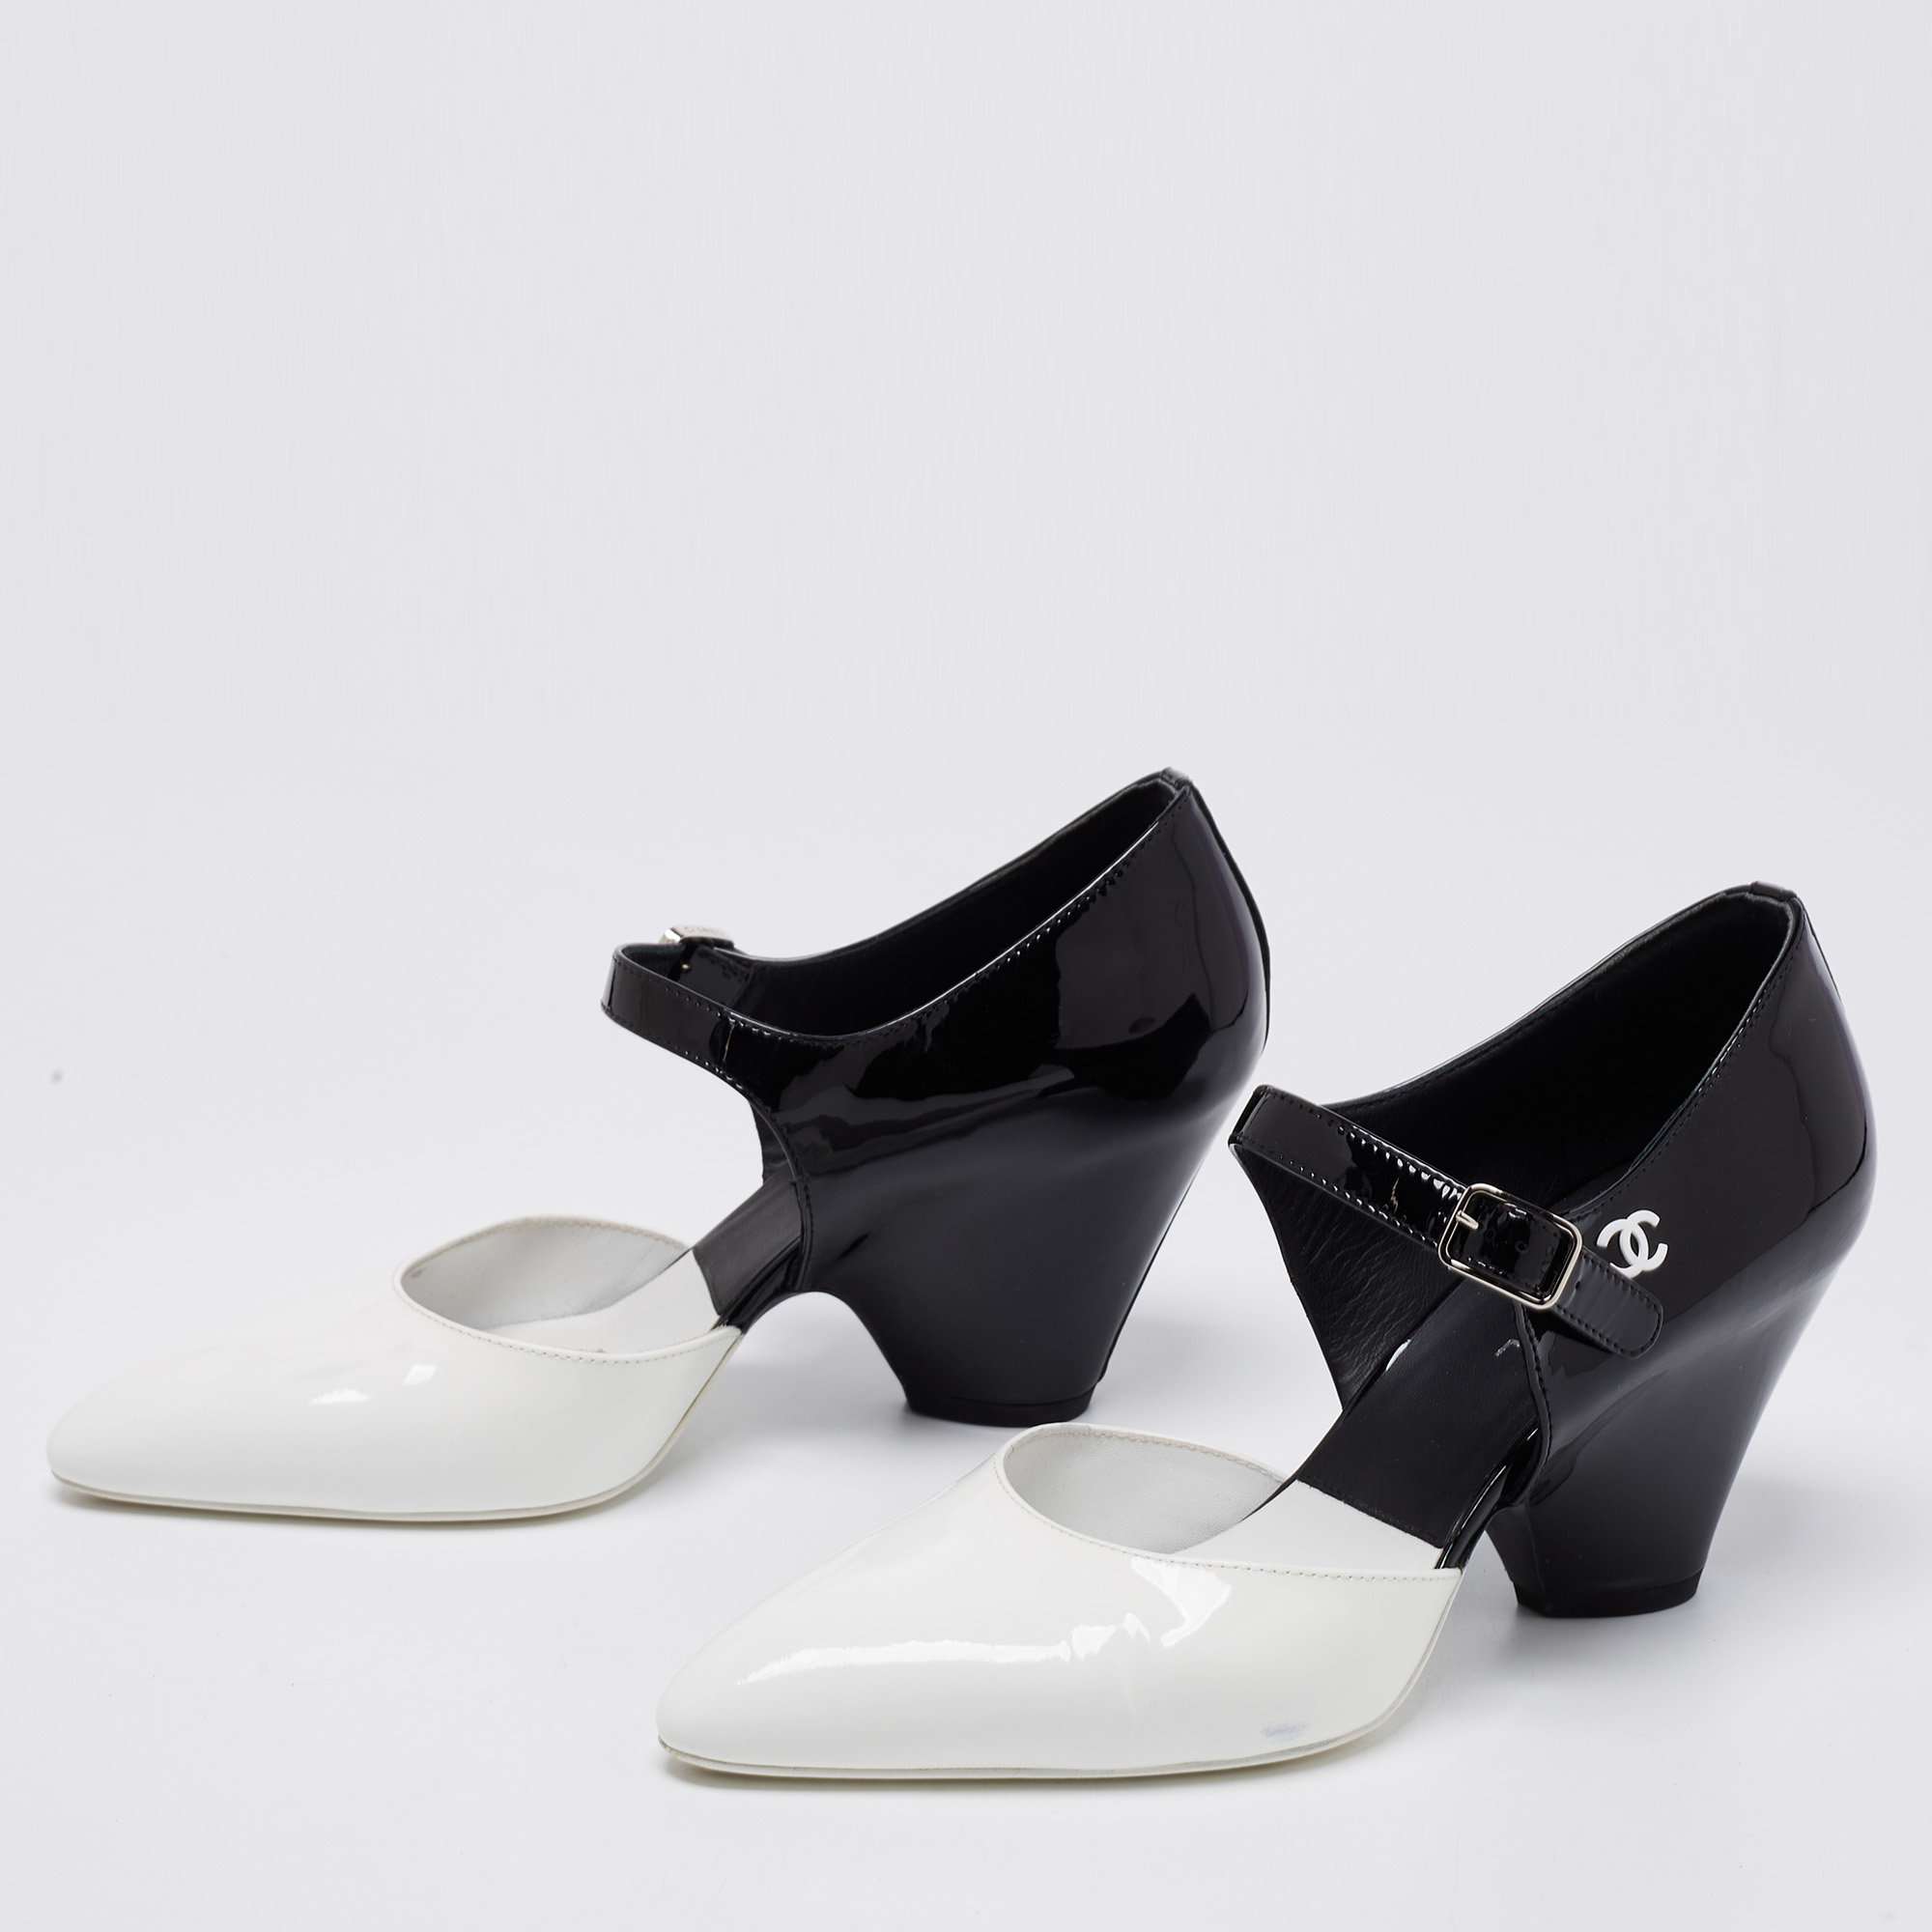 

Chanel White/Black Patent Leather CC Mary Jane Wedge Heel Pumps Size